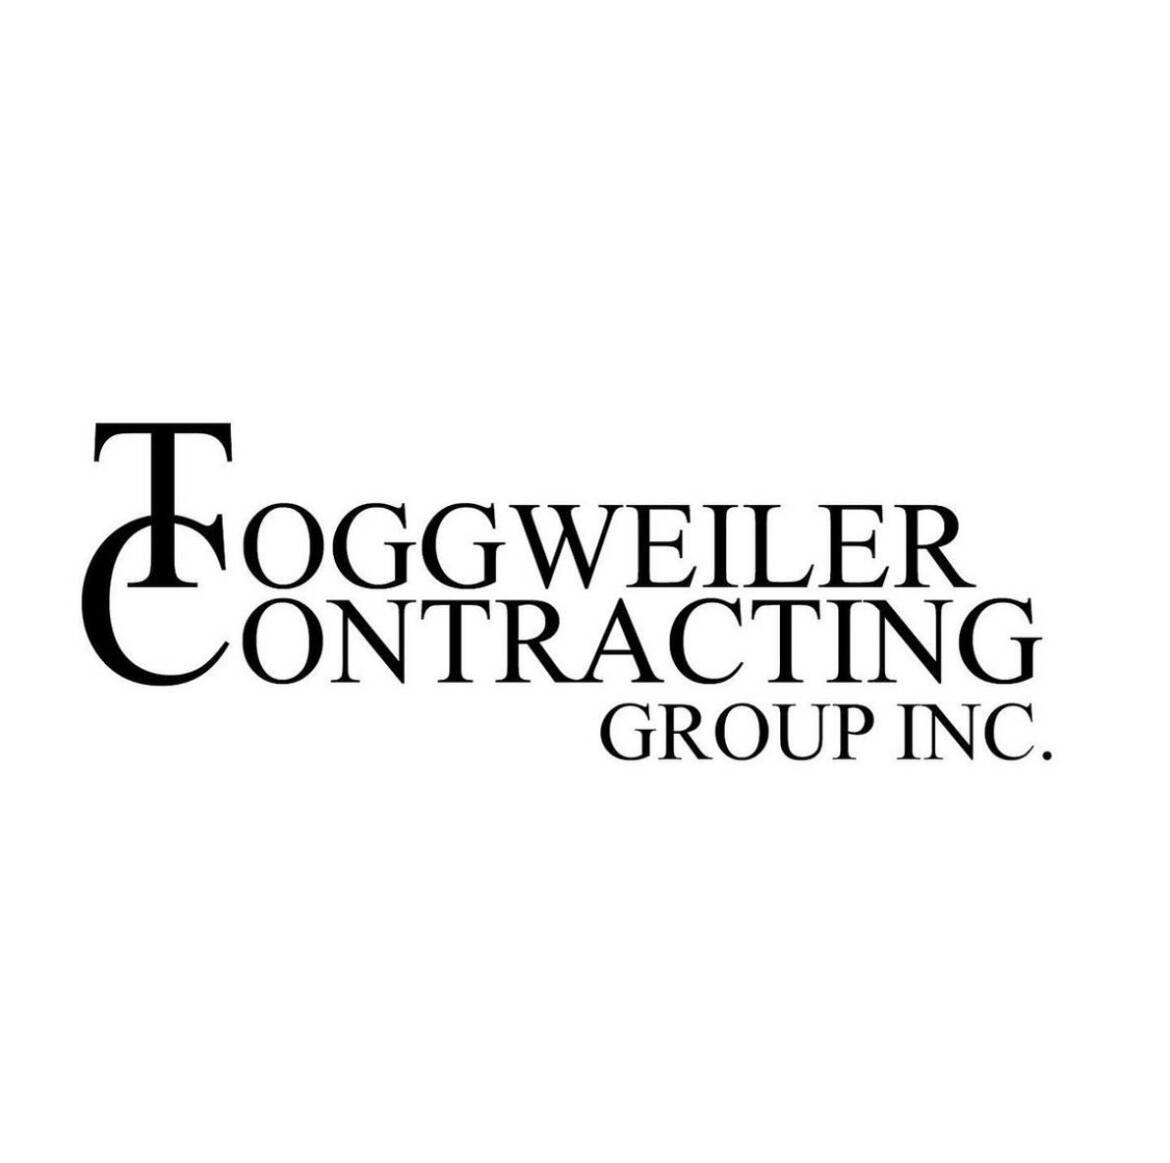 Toggweiler Contracting Group Inc